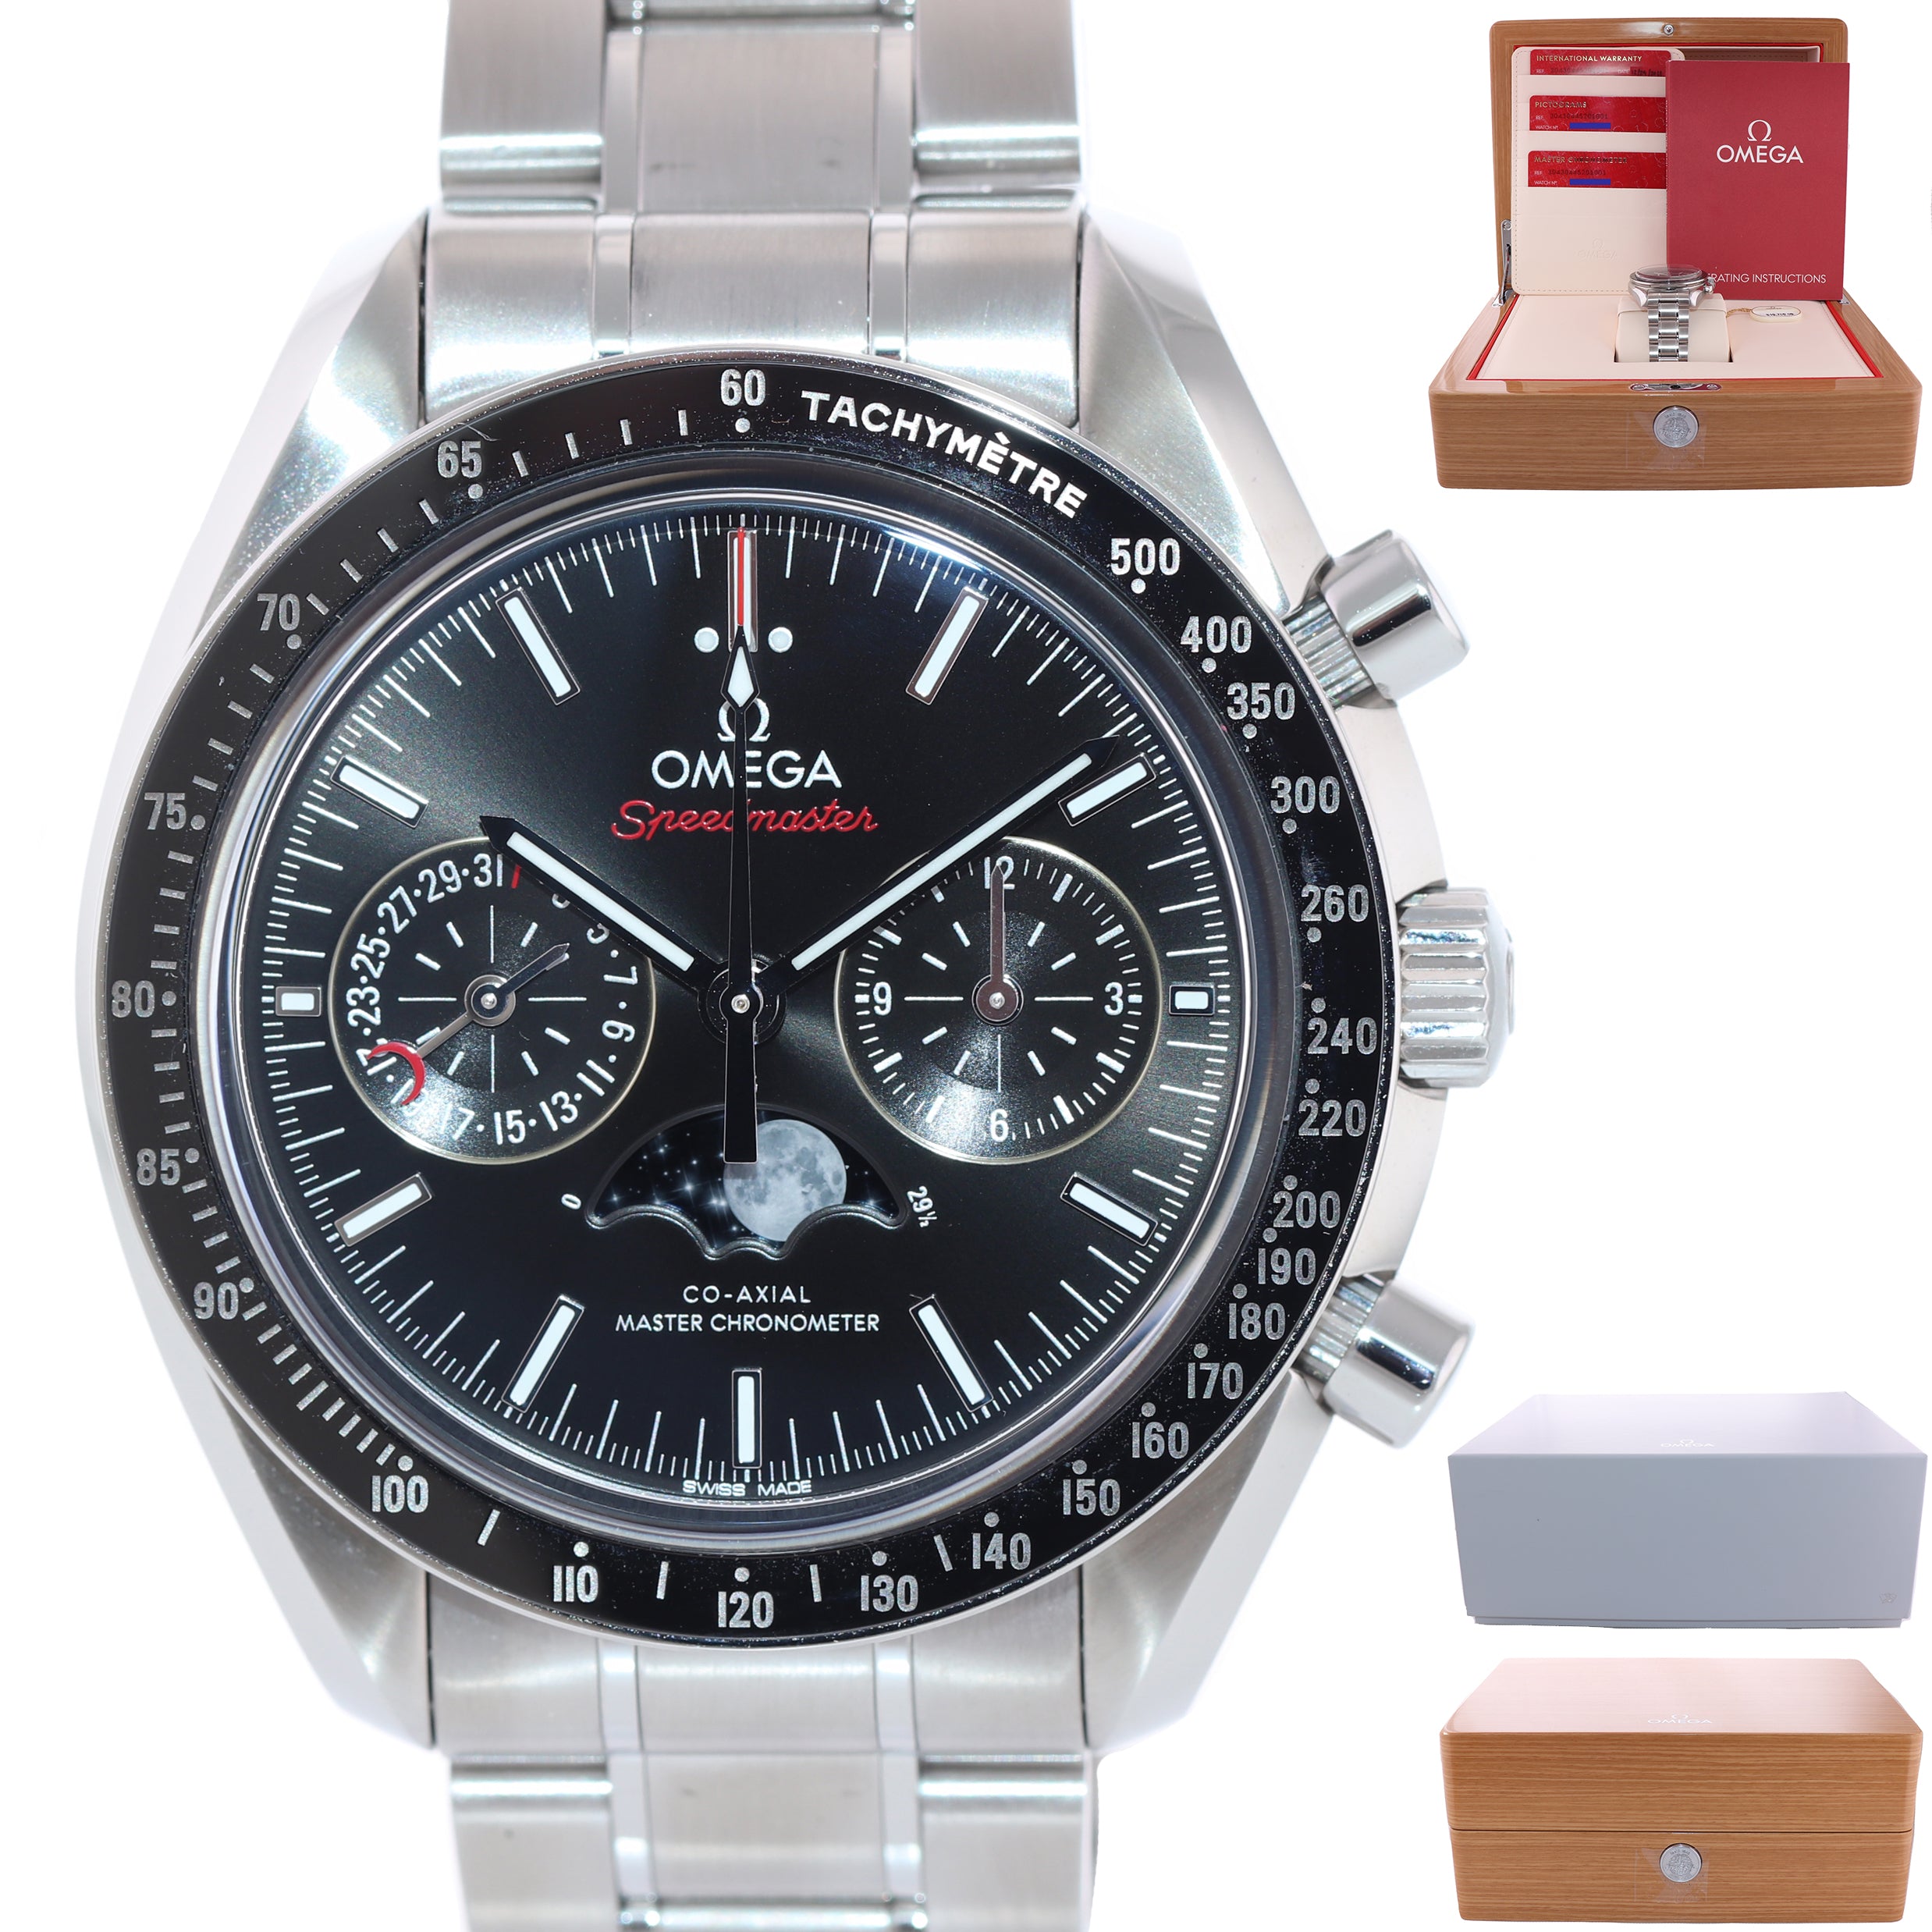 2021 NEW PAPERS Omega Speedmaster Moonphase 304.30.44.52.01.001 44mm Steel Watch